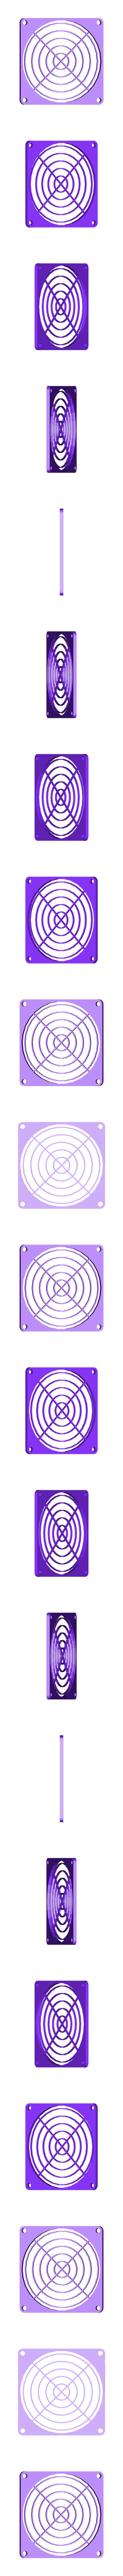 80mm_crosshair_full_fan_cover.stl Download free STL file Customizable Fan Grill Cover • 3D print design, MightyNozzle